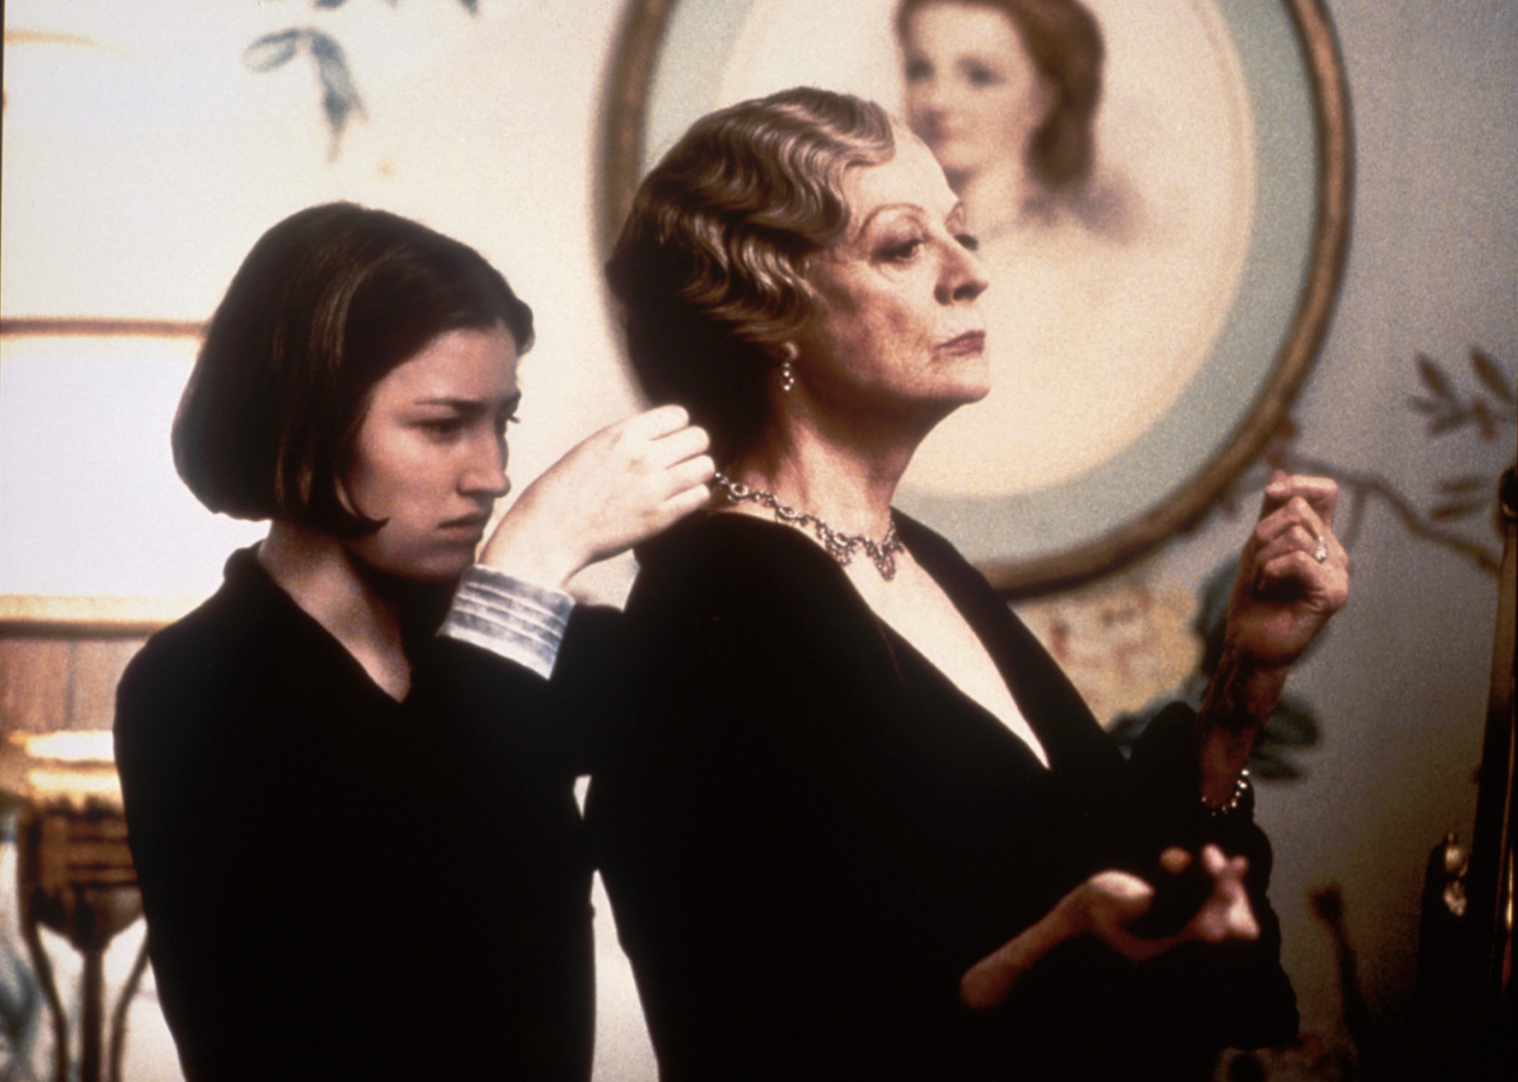 Maggie Smith and Kelly Macdonald in "Gosford Park"